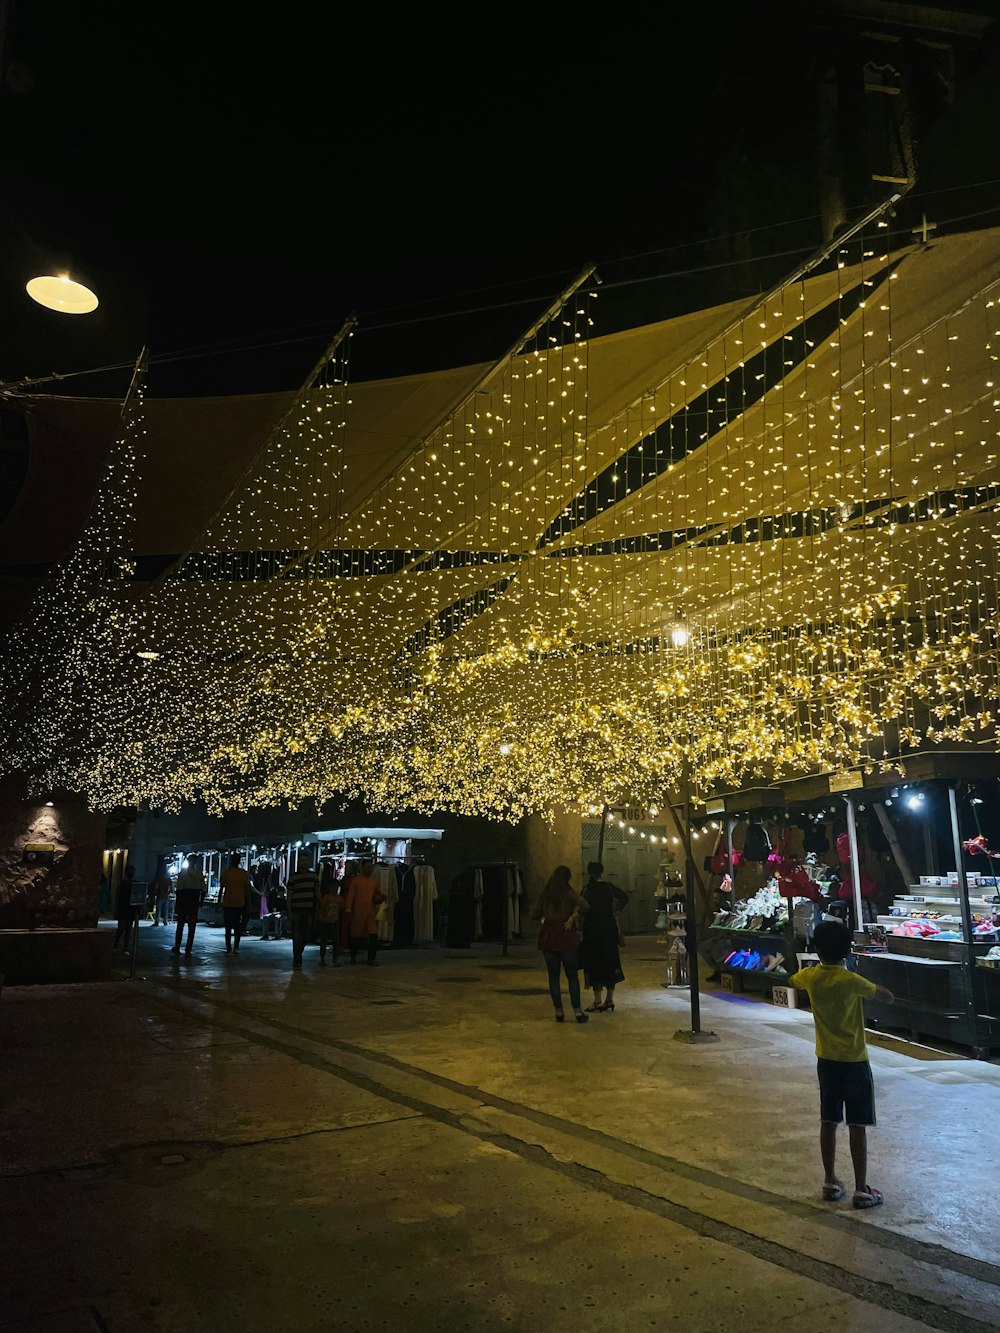 a man standing under a canopy covered in lights